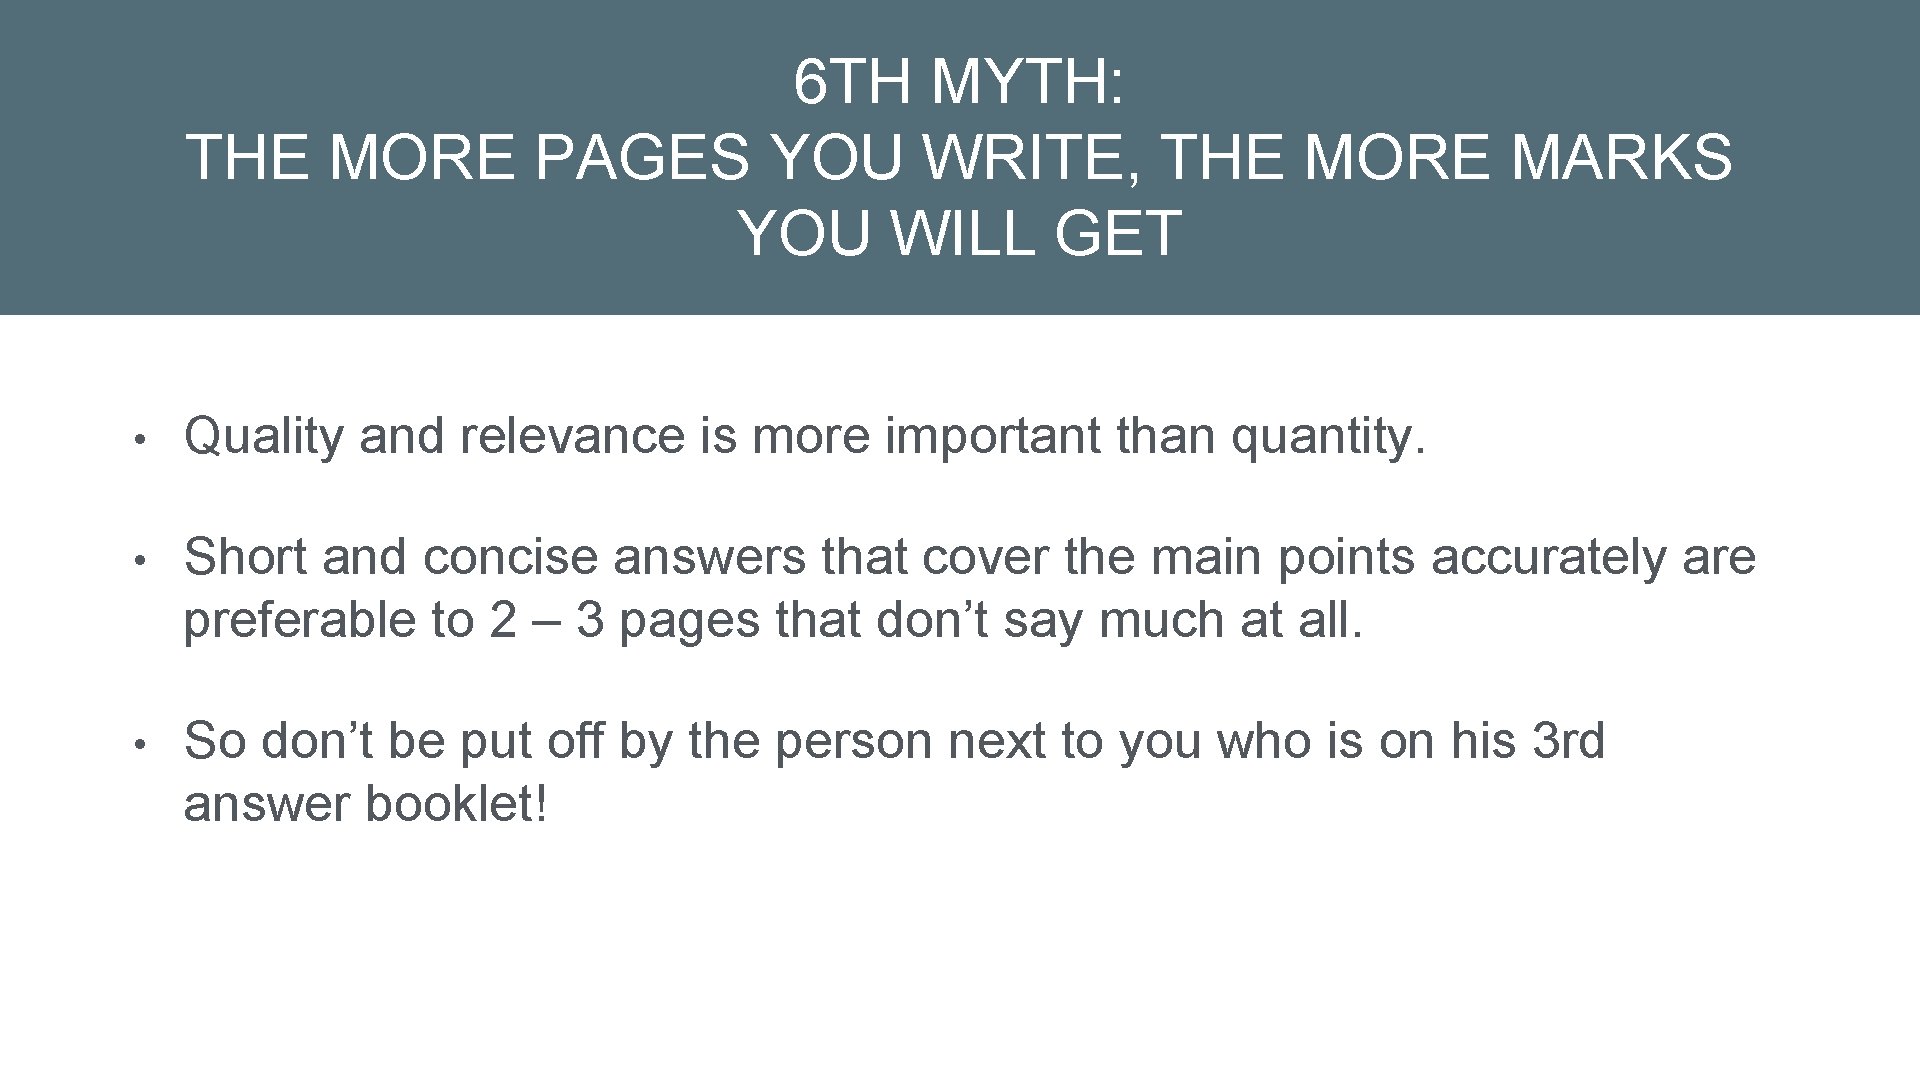 6 TH MYTH: THE MORE PAGES YOU WRITE, THE MORE MARKS YOU WILL GET